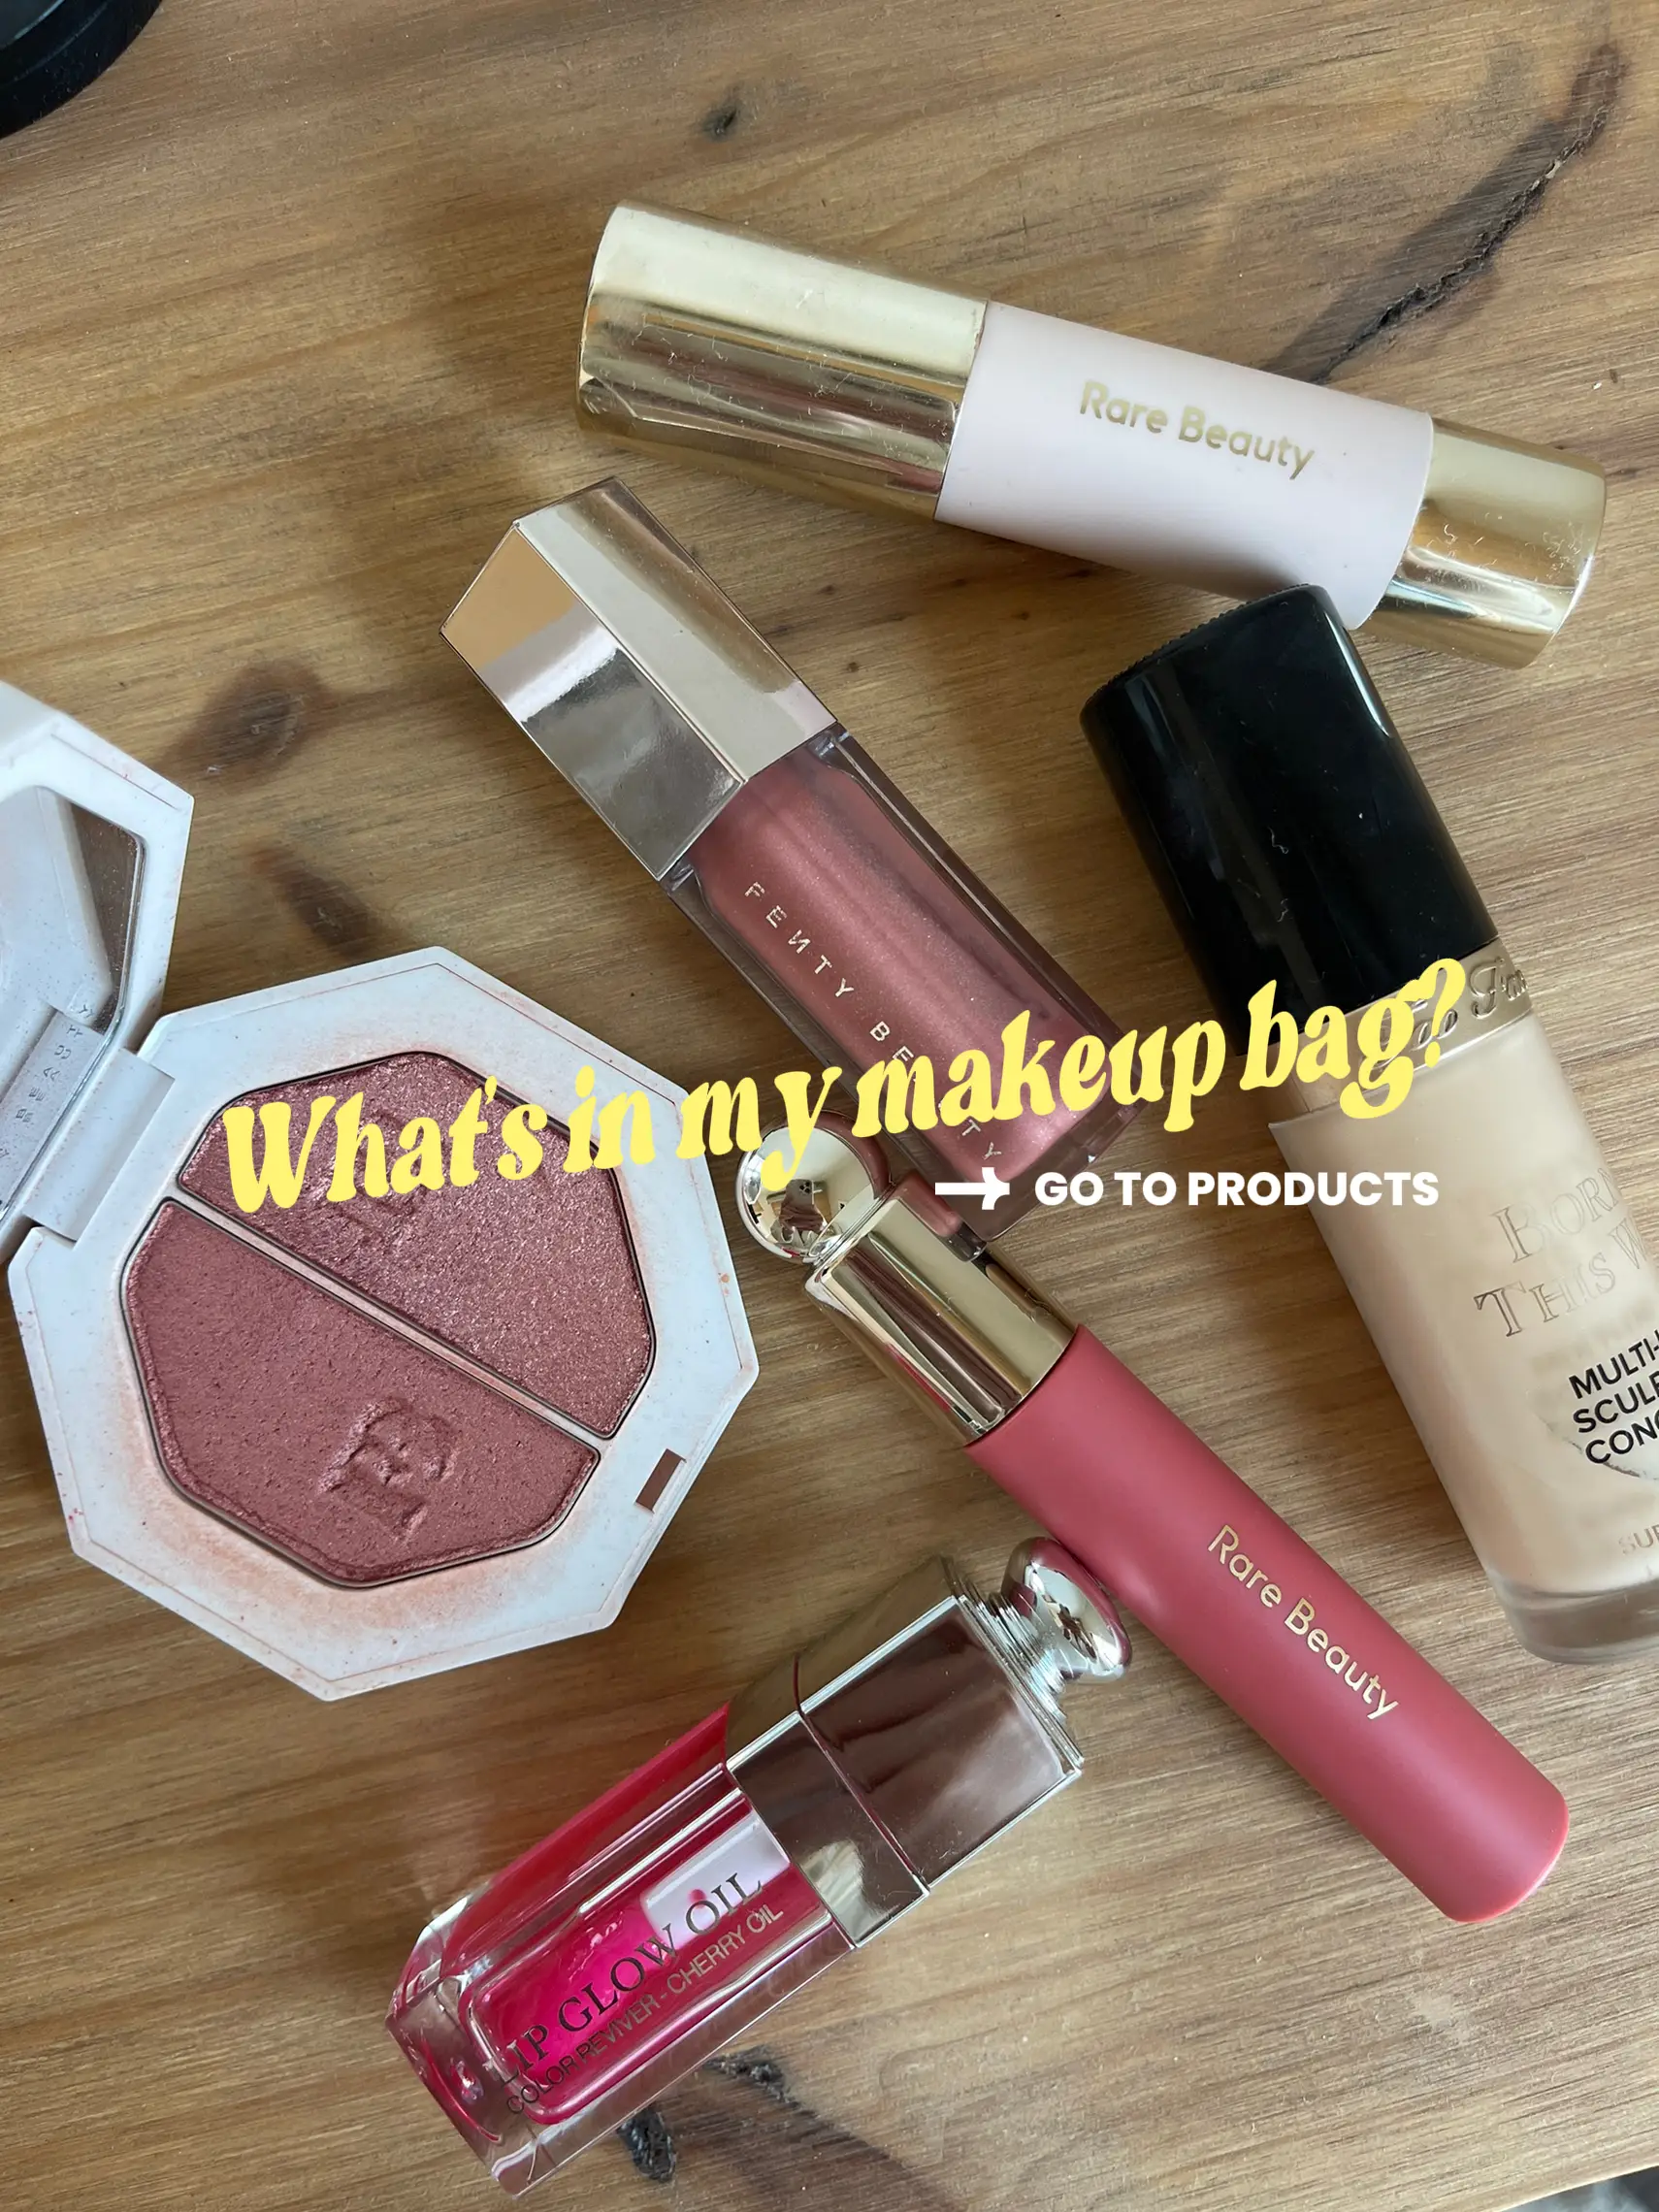 How to Pack Makeup for Travel: Dos and Don'ts – Kinder Beauty